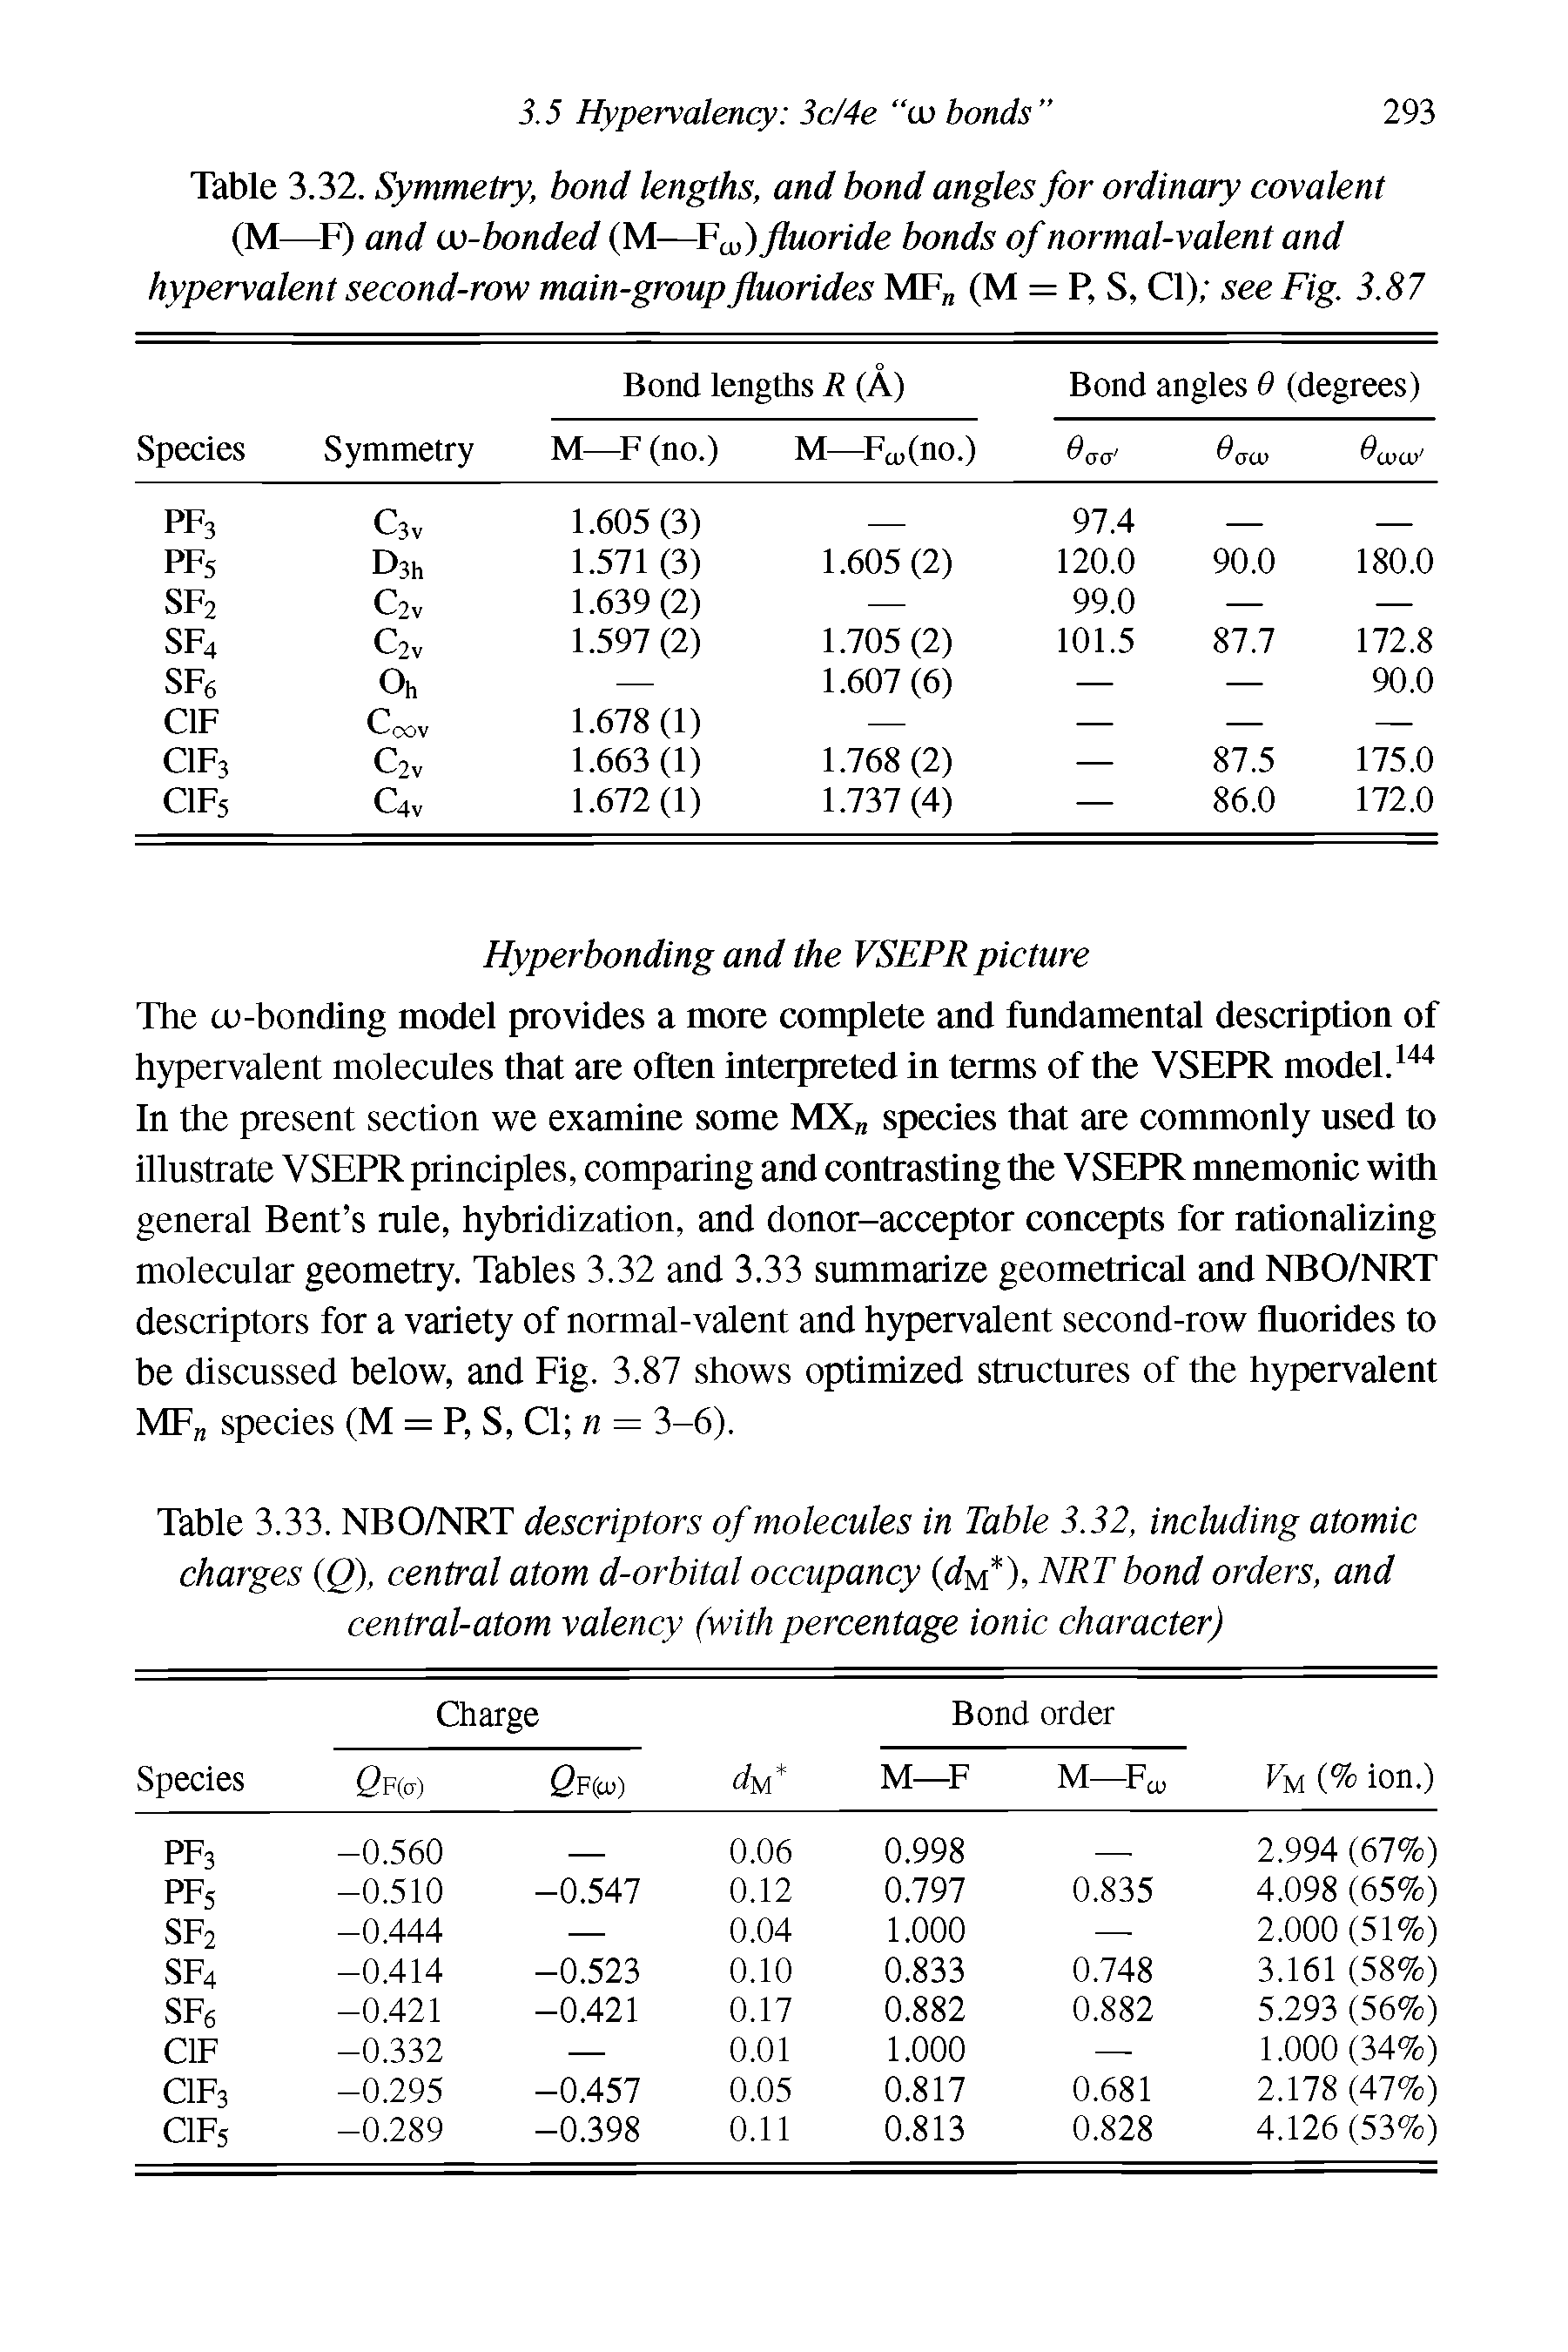 Table 3.32. Symmetry, bond lengths, and bond angles for ordinary covalent (M—F) and uo-bonded (M—I cu) fluoride bonds of normal-valent and hypervalent second-row main-group fluorides MF (M = P, S, Cl) see Fig. 3.87...